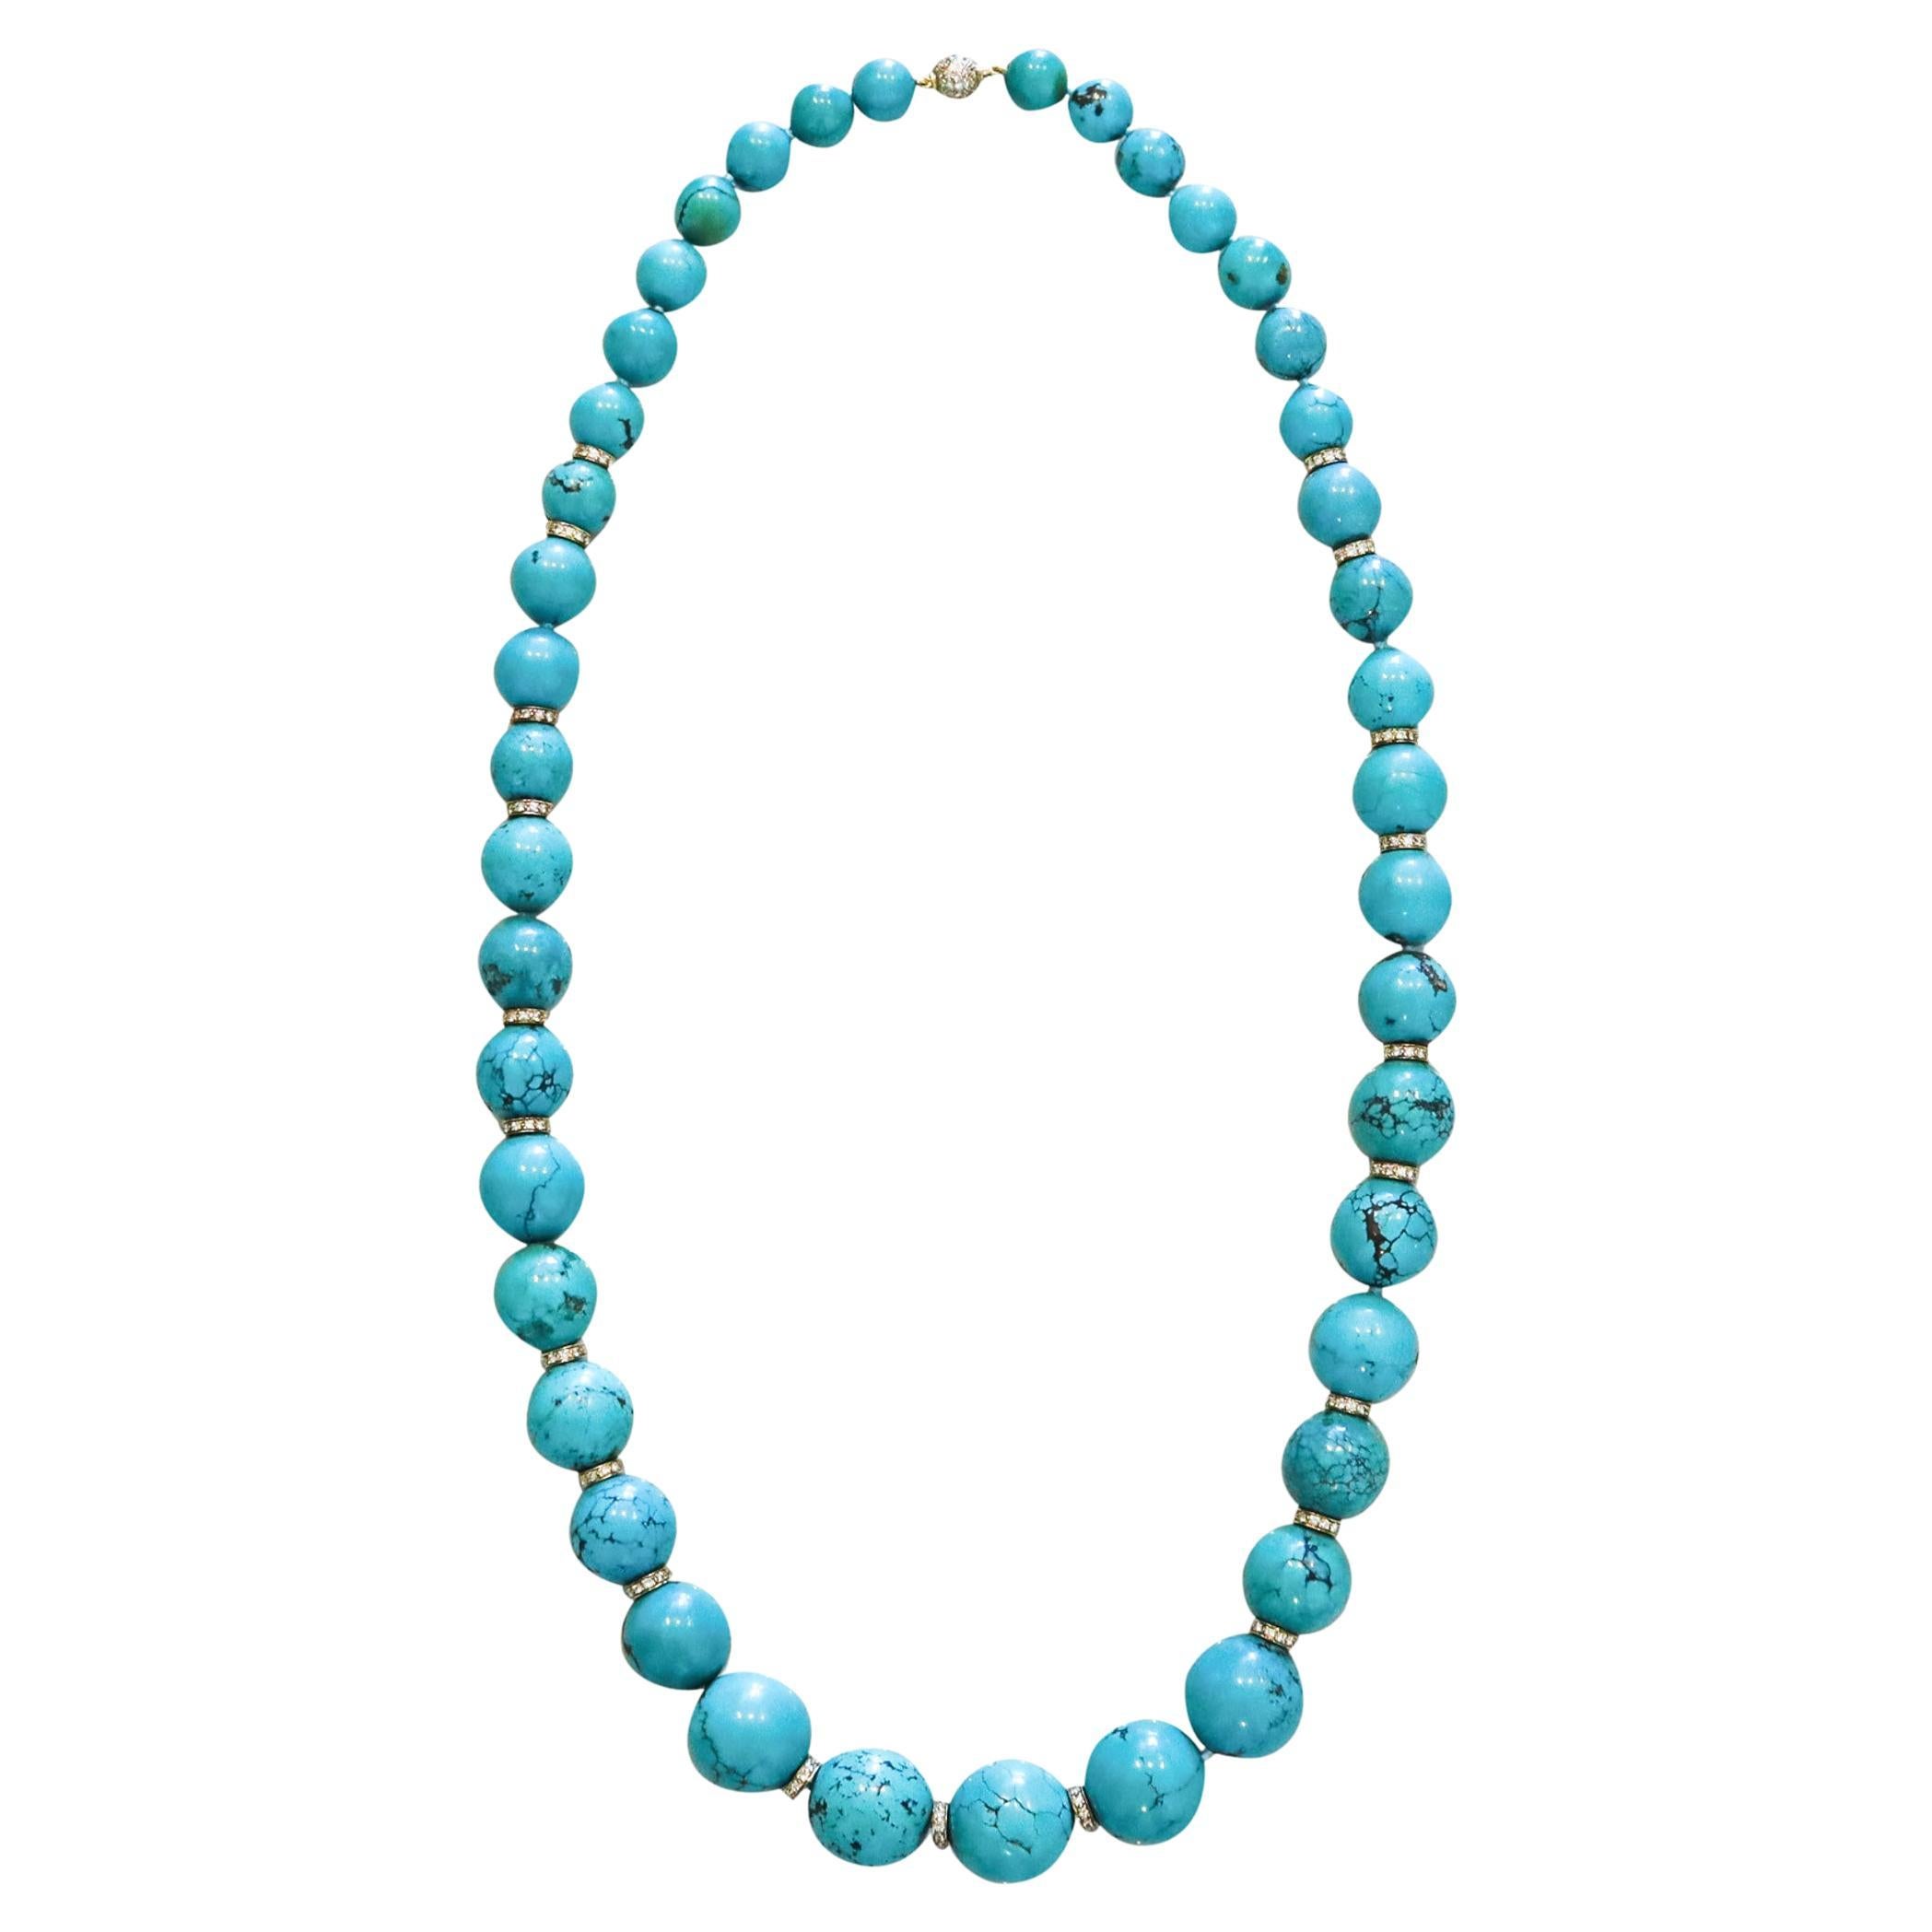 Nani Cesare Modernist Turquoise Long Necklace 18Kt Gold With 14.06 Ctw Diamonds